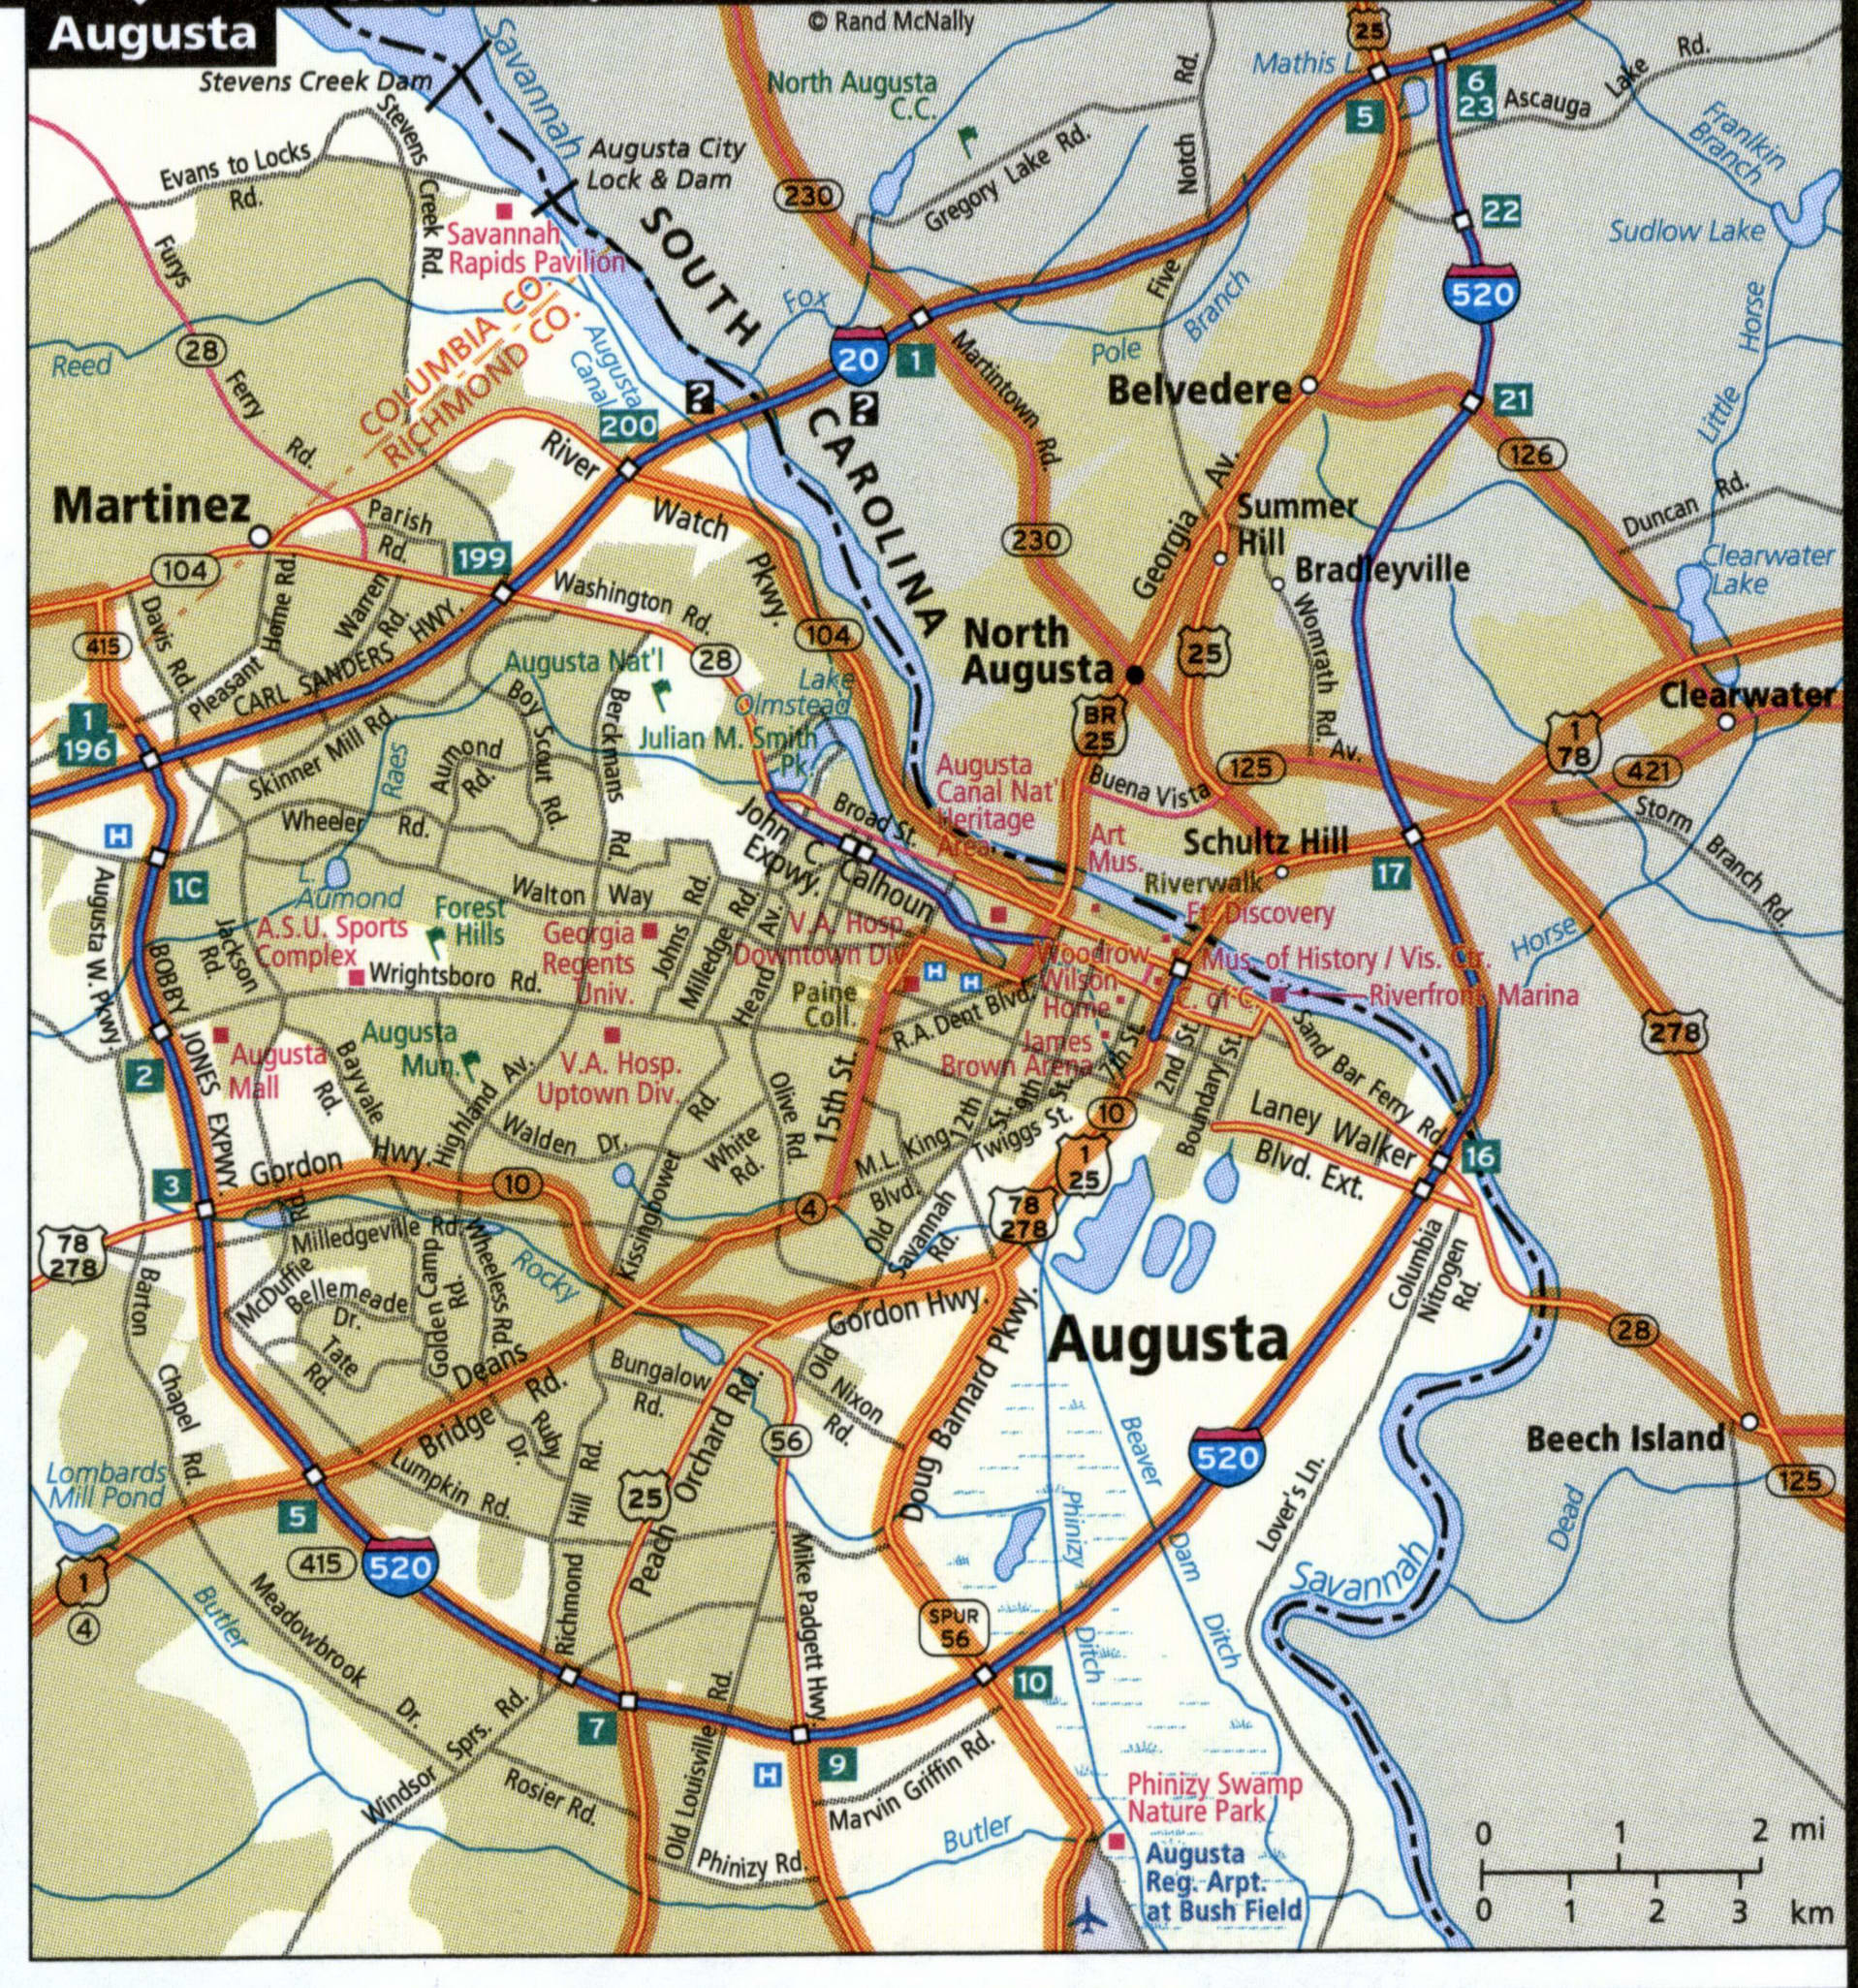 Augusta city map for truckers